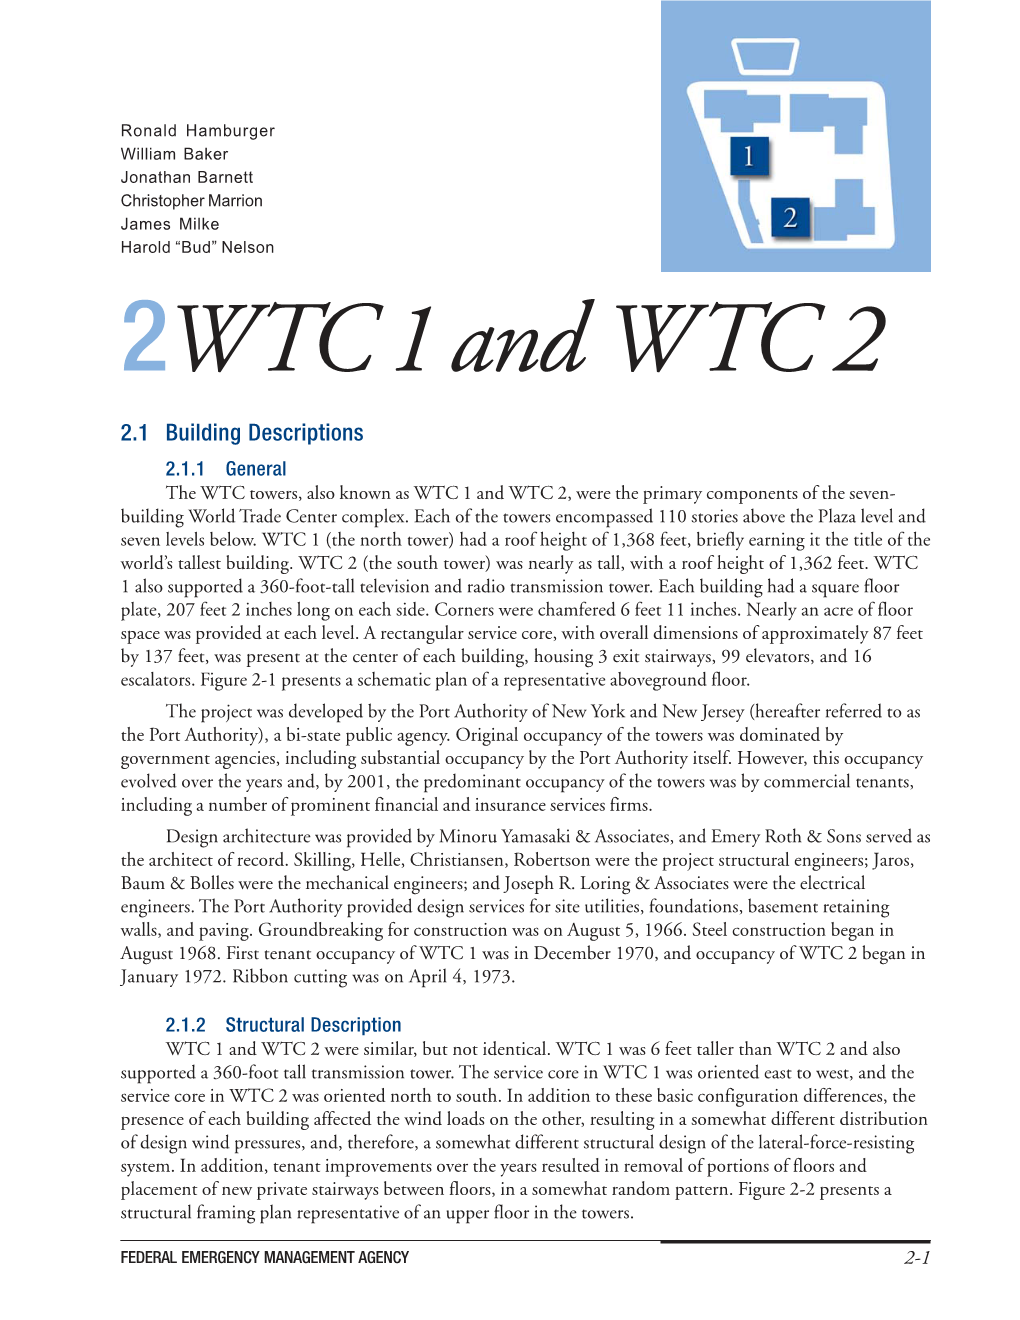 Chapter 2. WTC 1 and WTC 2